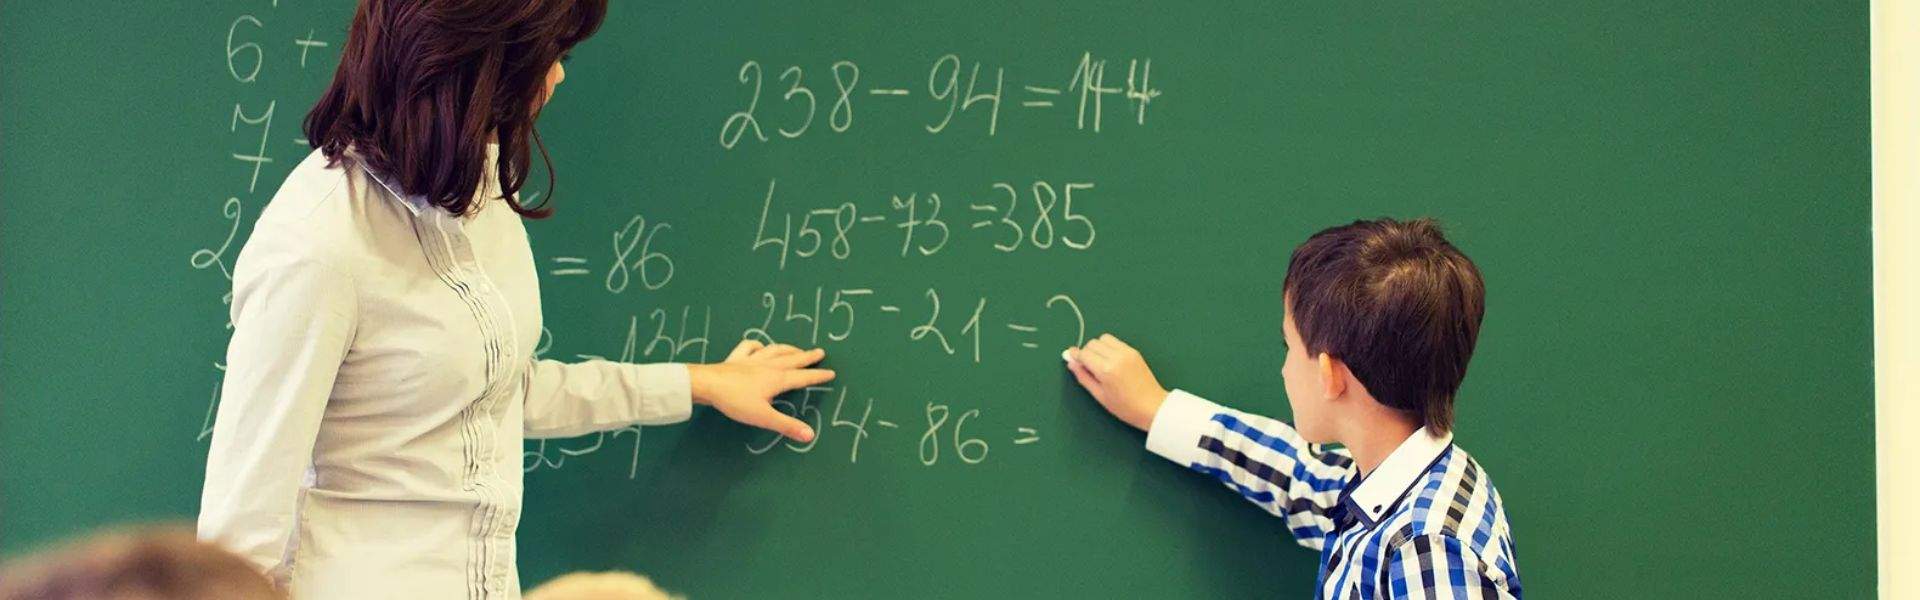 Boosting Brain Power: 5 Strategies to Make Math Classroom Click for Every Student